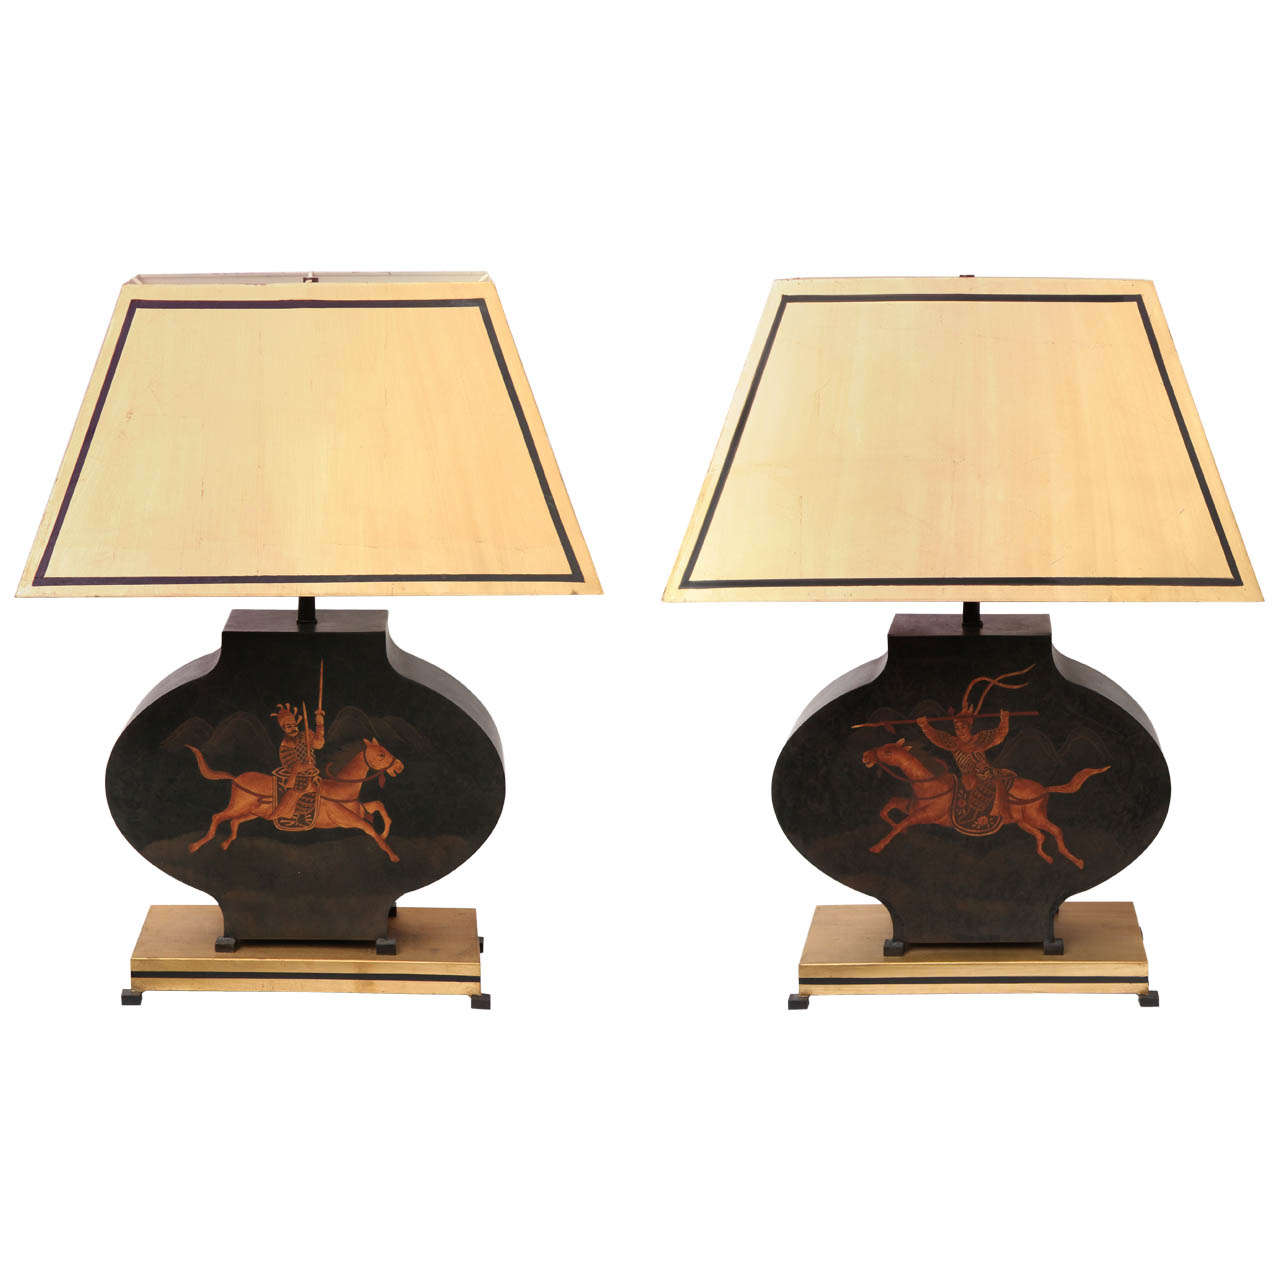 Pair of Classical Modern Decorated Tole Metal Table Lamps